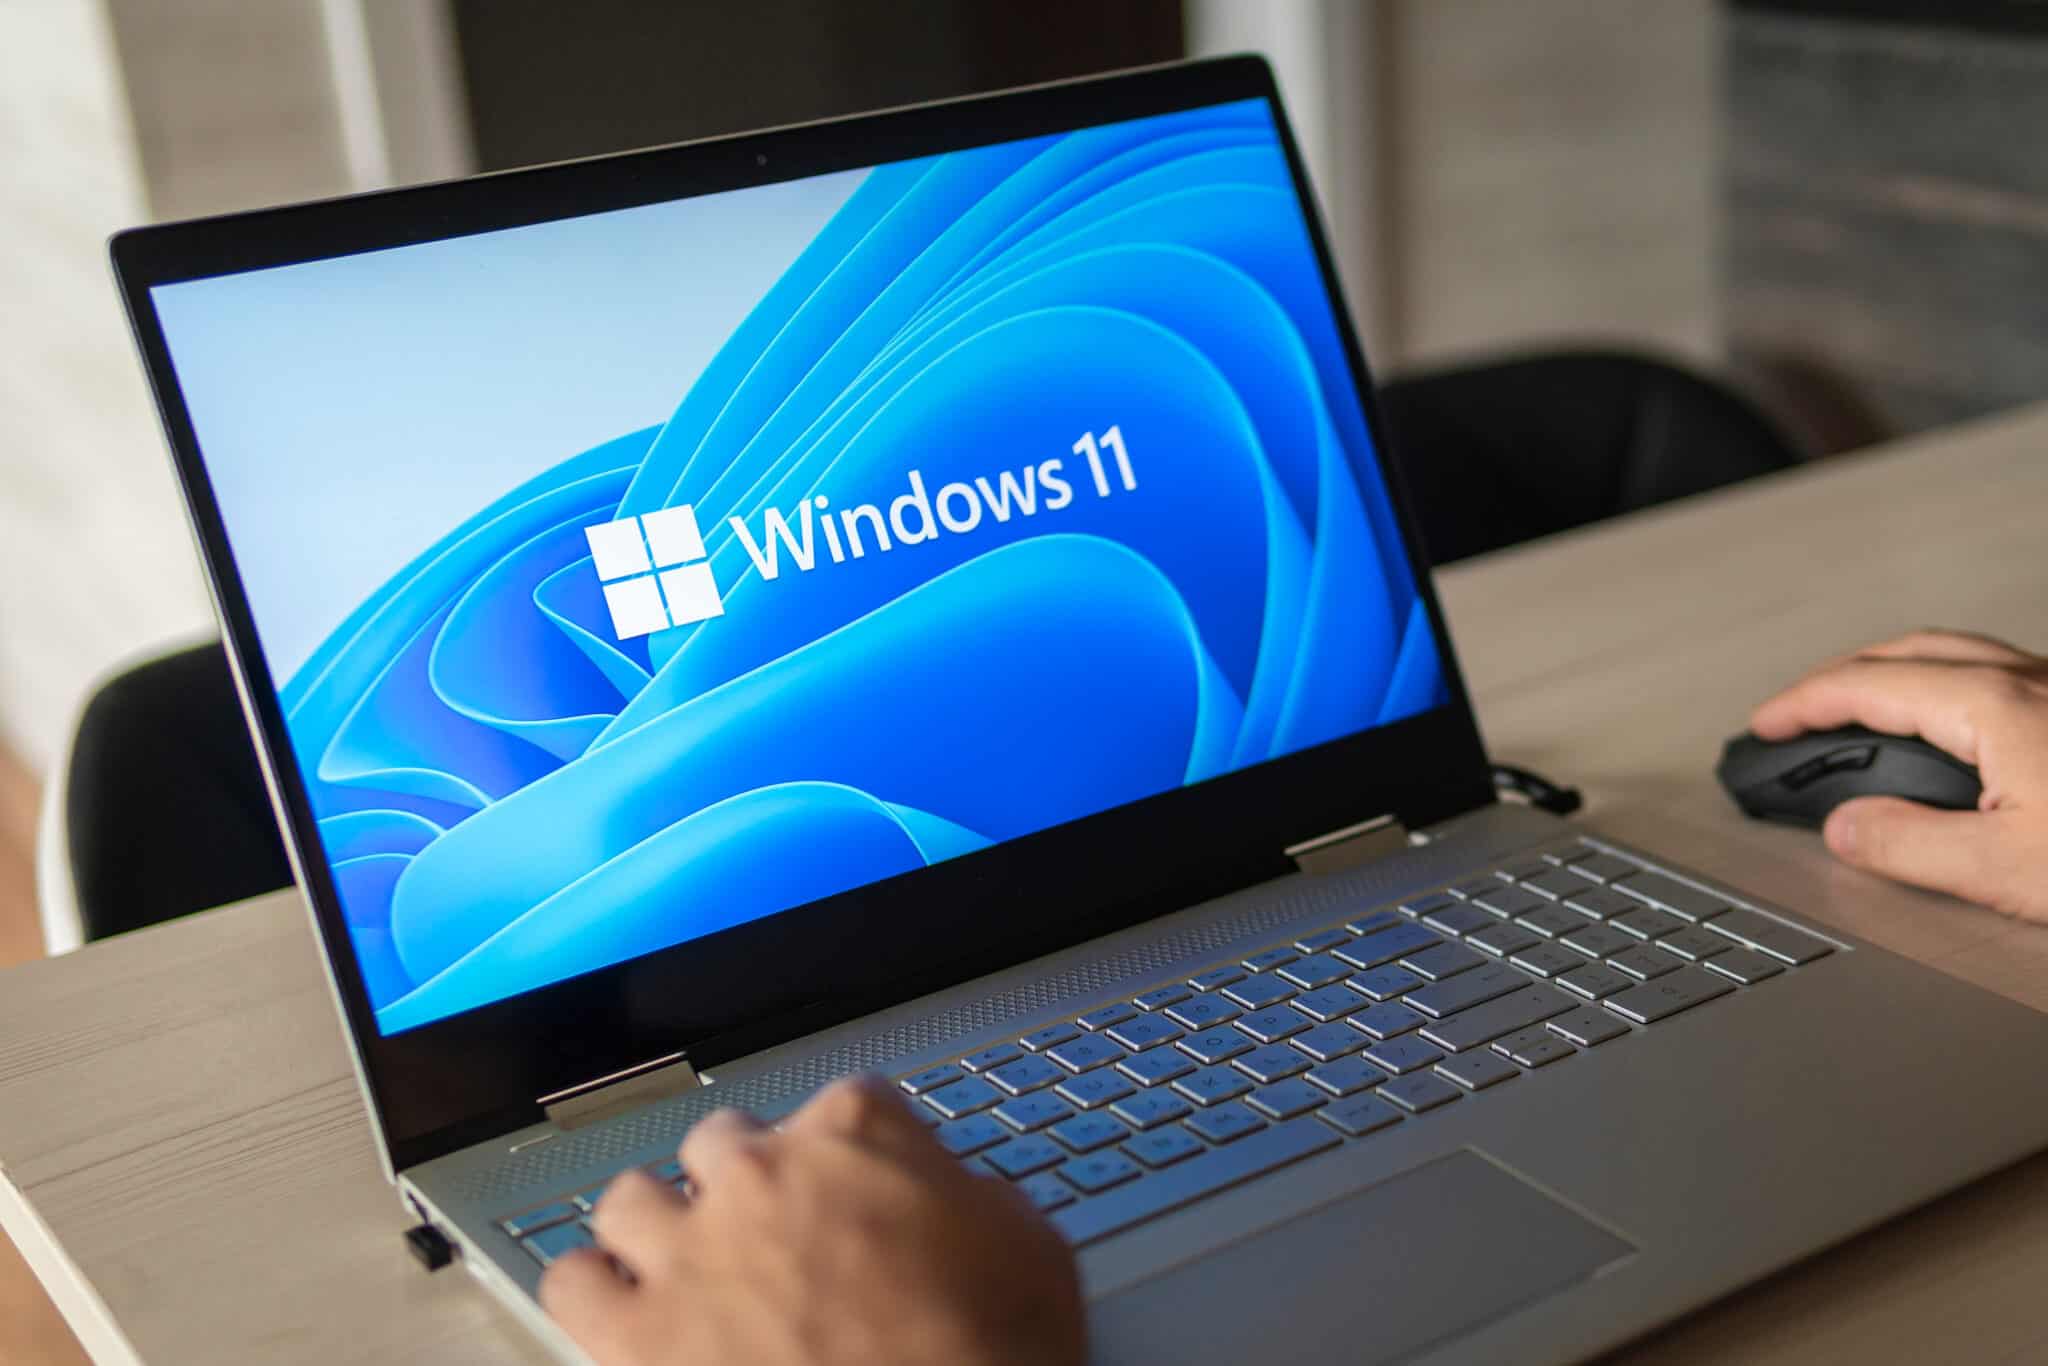 The 5 Best Laptops For Windows 11 in 2023